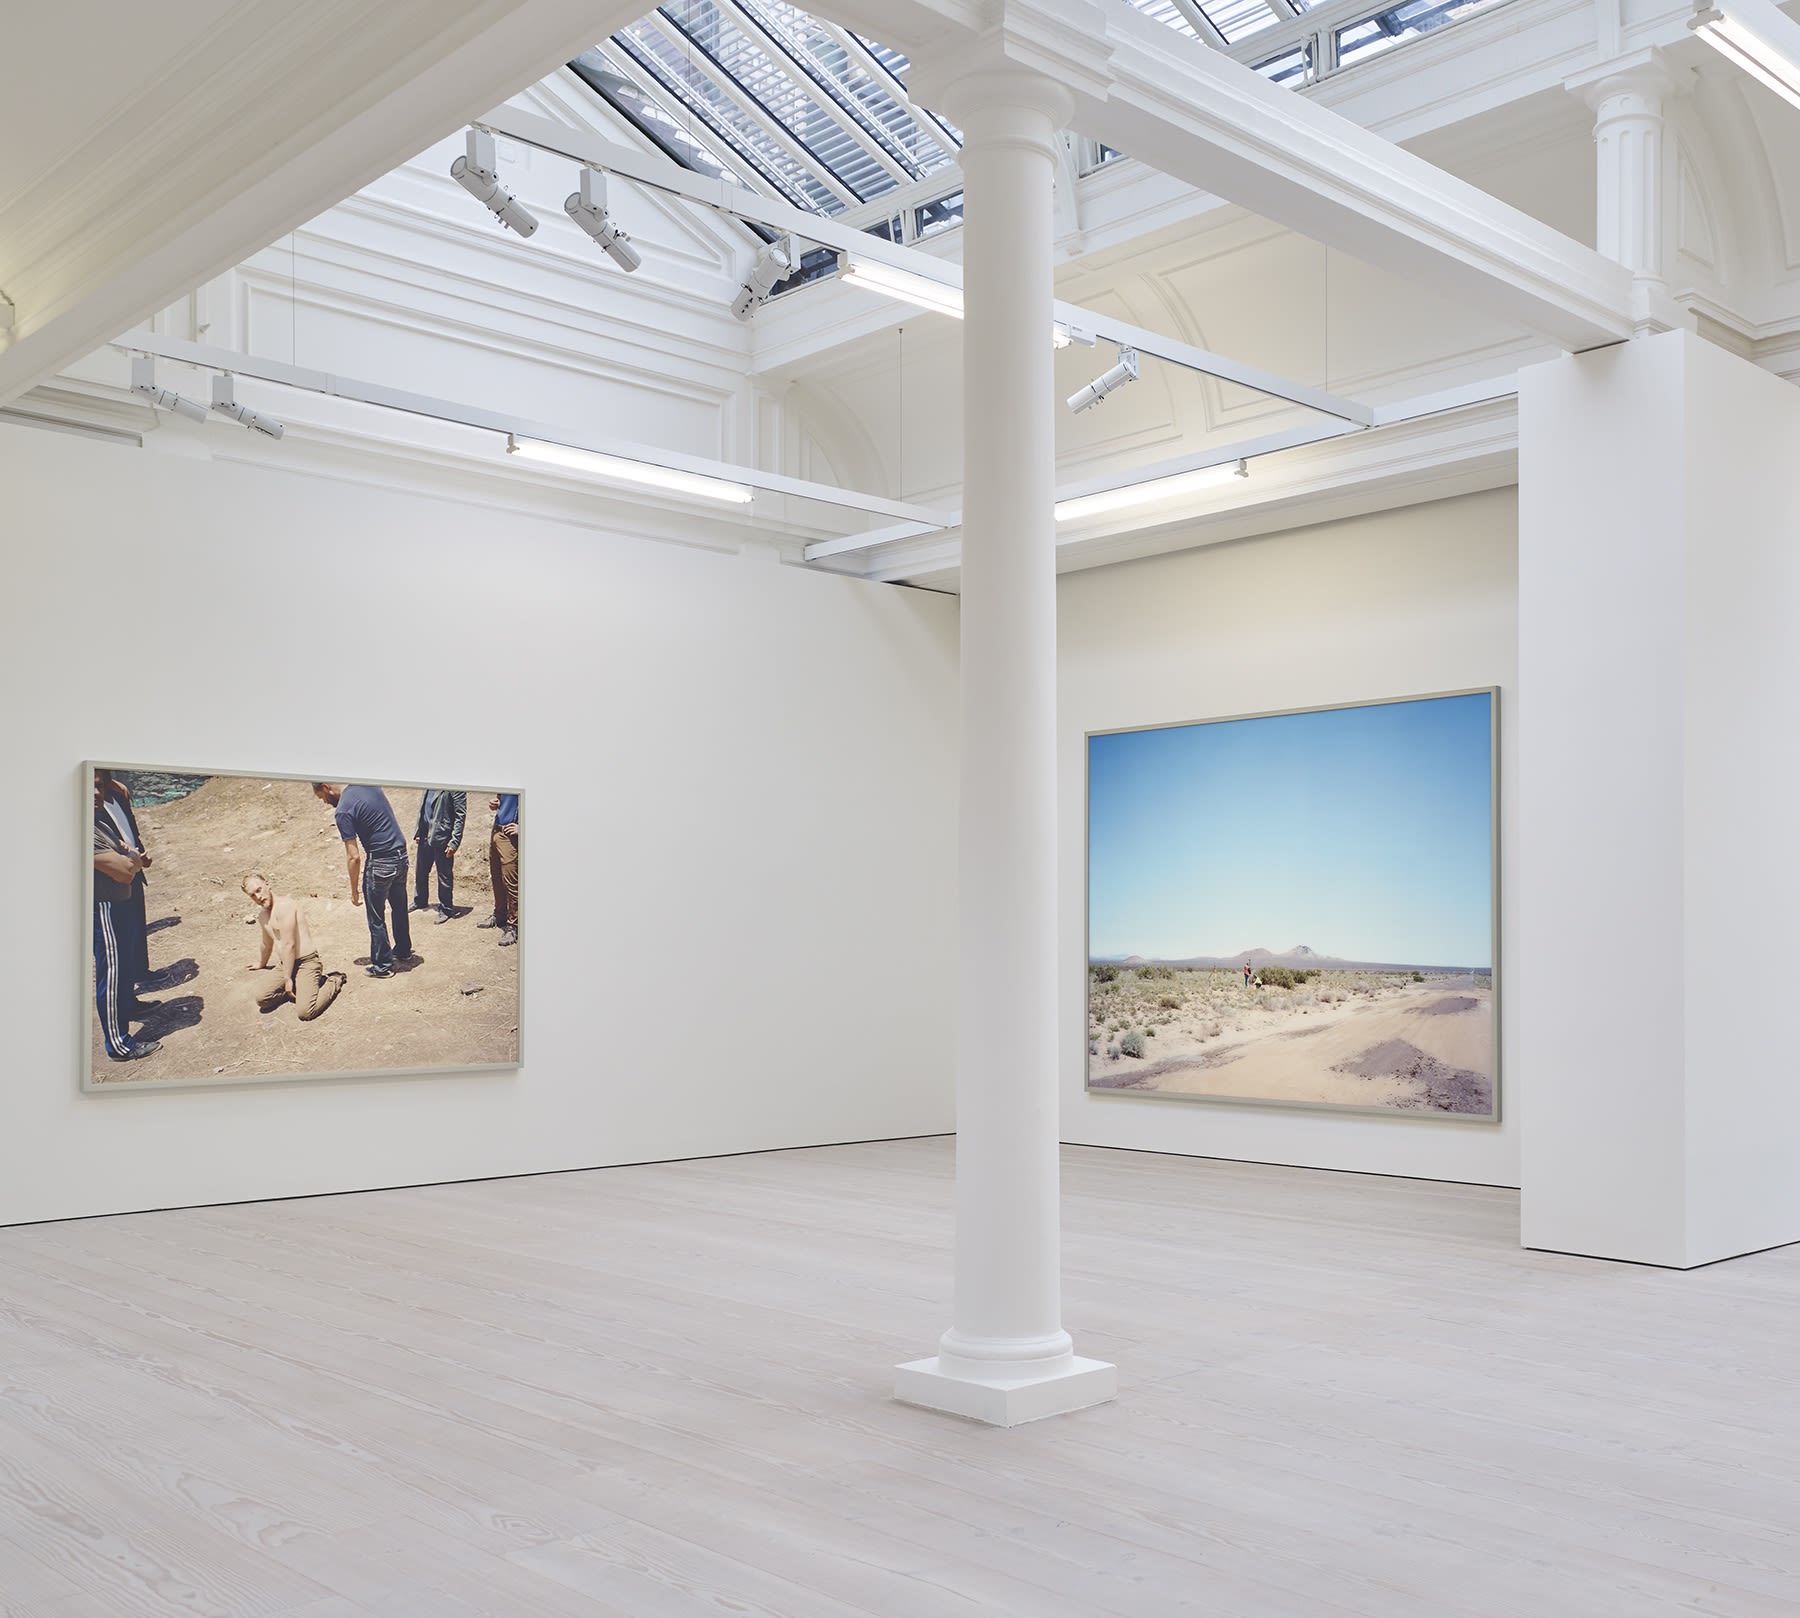 2 large photographs hang in the corner of a white room with skylights. On the left a shirtless man on the ground surrounded by 6 clothed men, and on the right a desert landscape. 